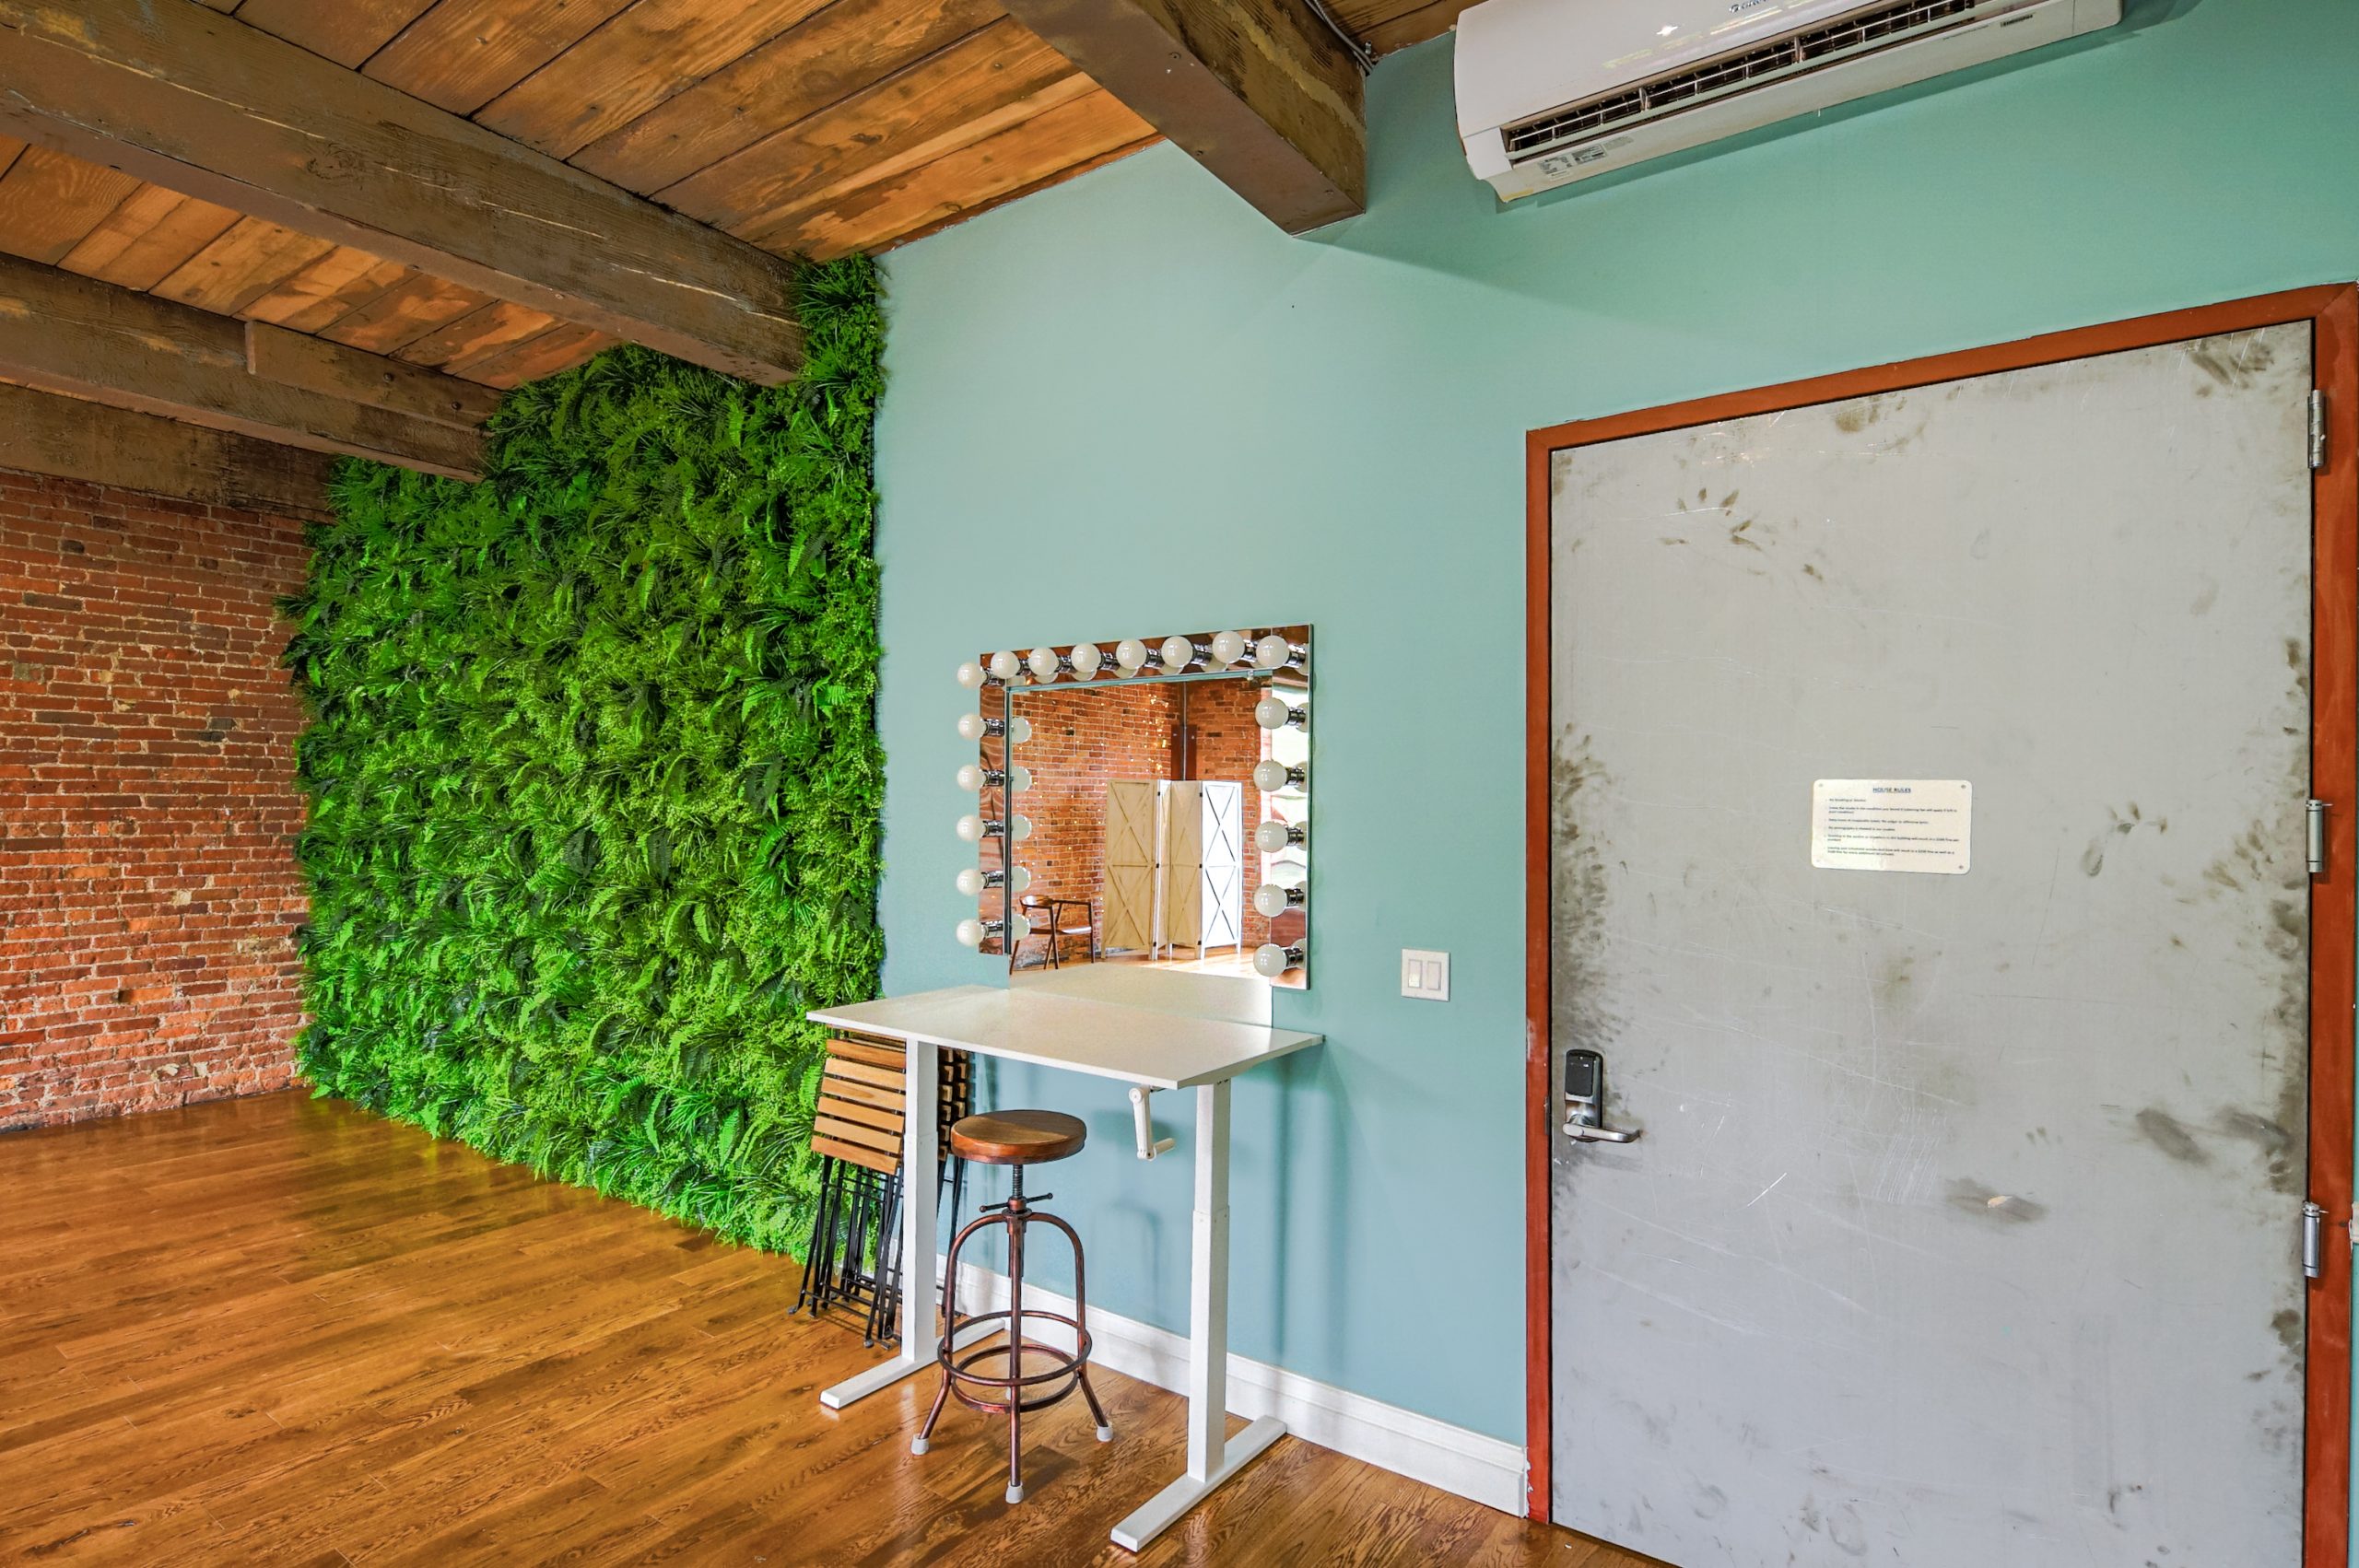 photo studio's vanity area with fern filled wall